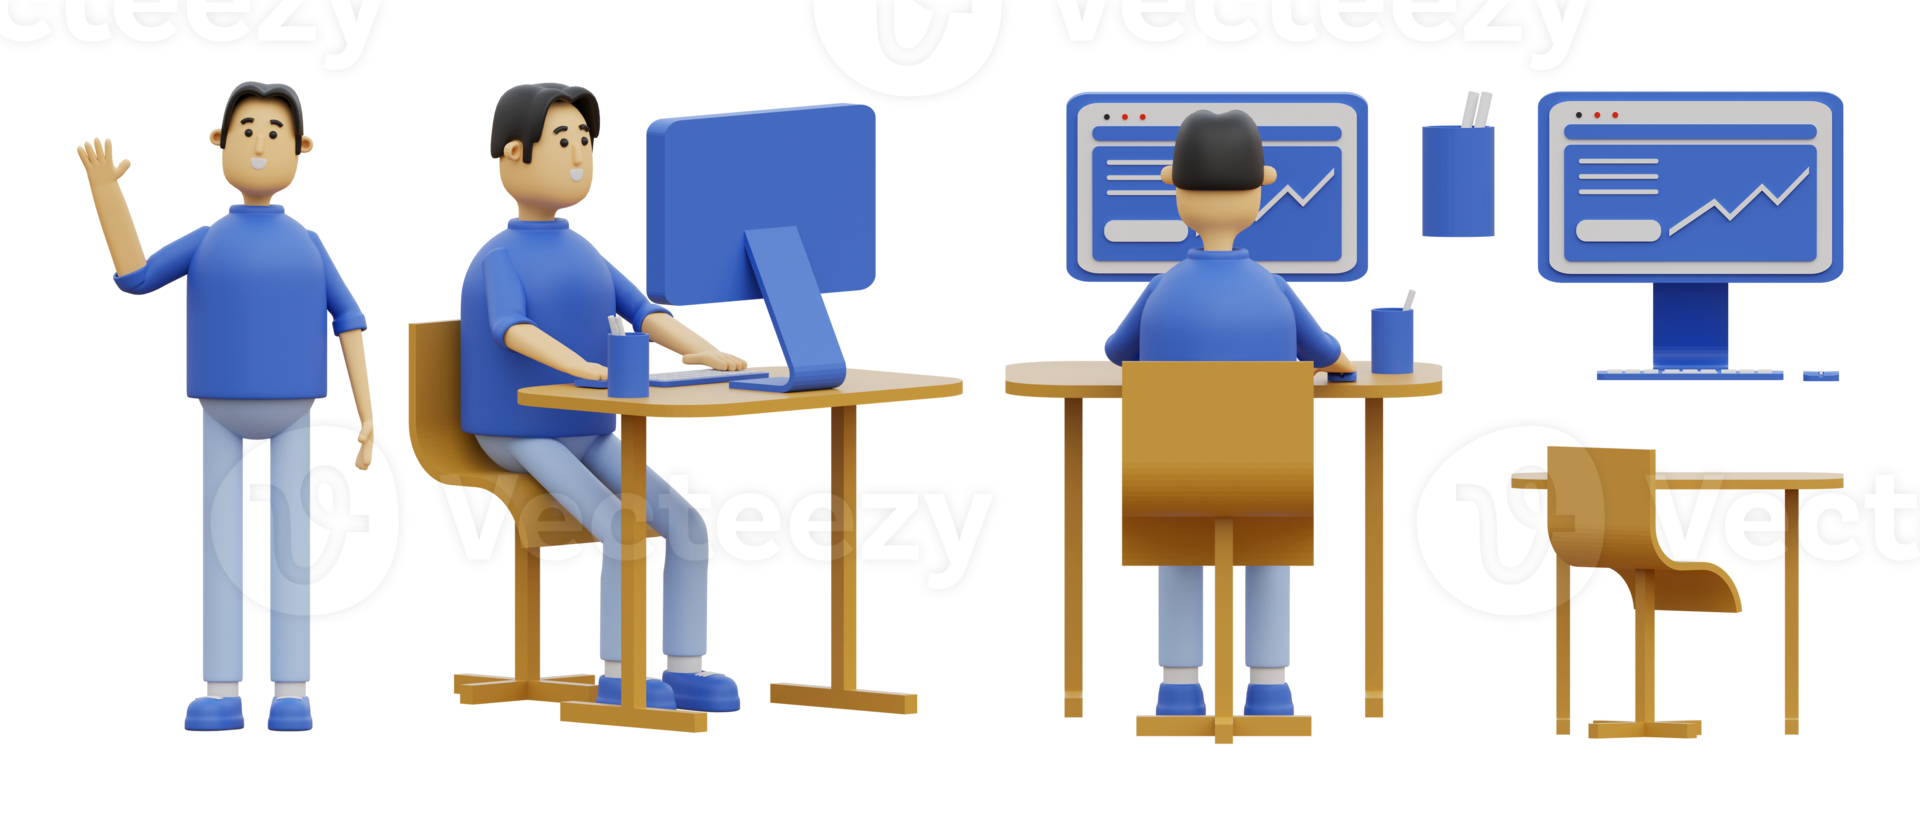 man working with computer 3d illustration set png